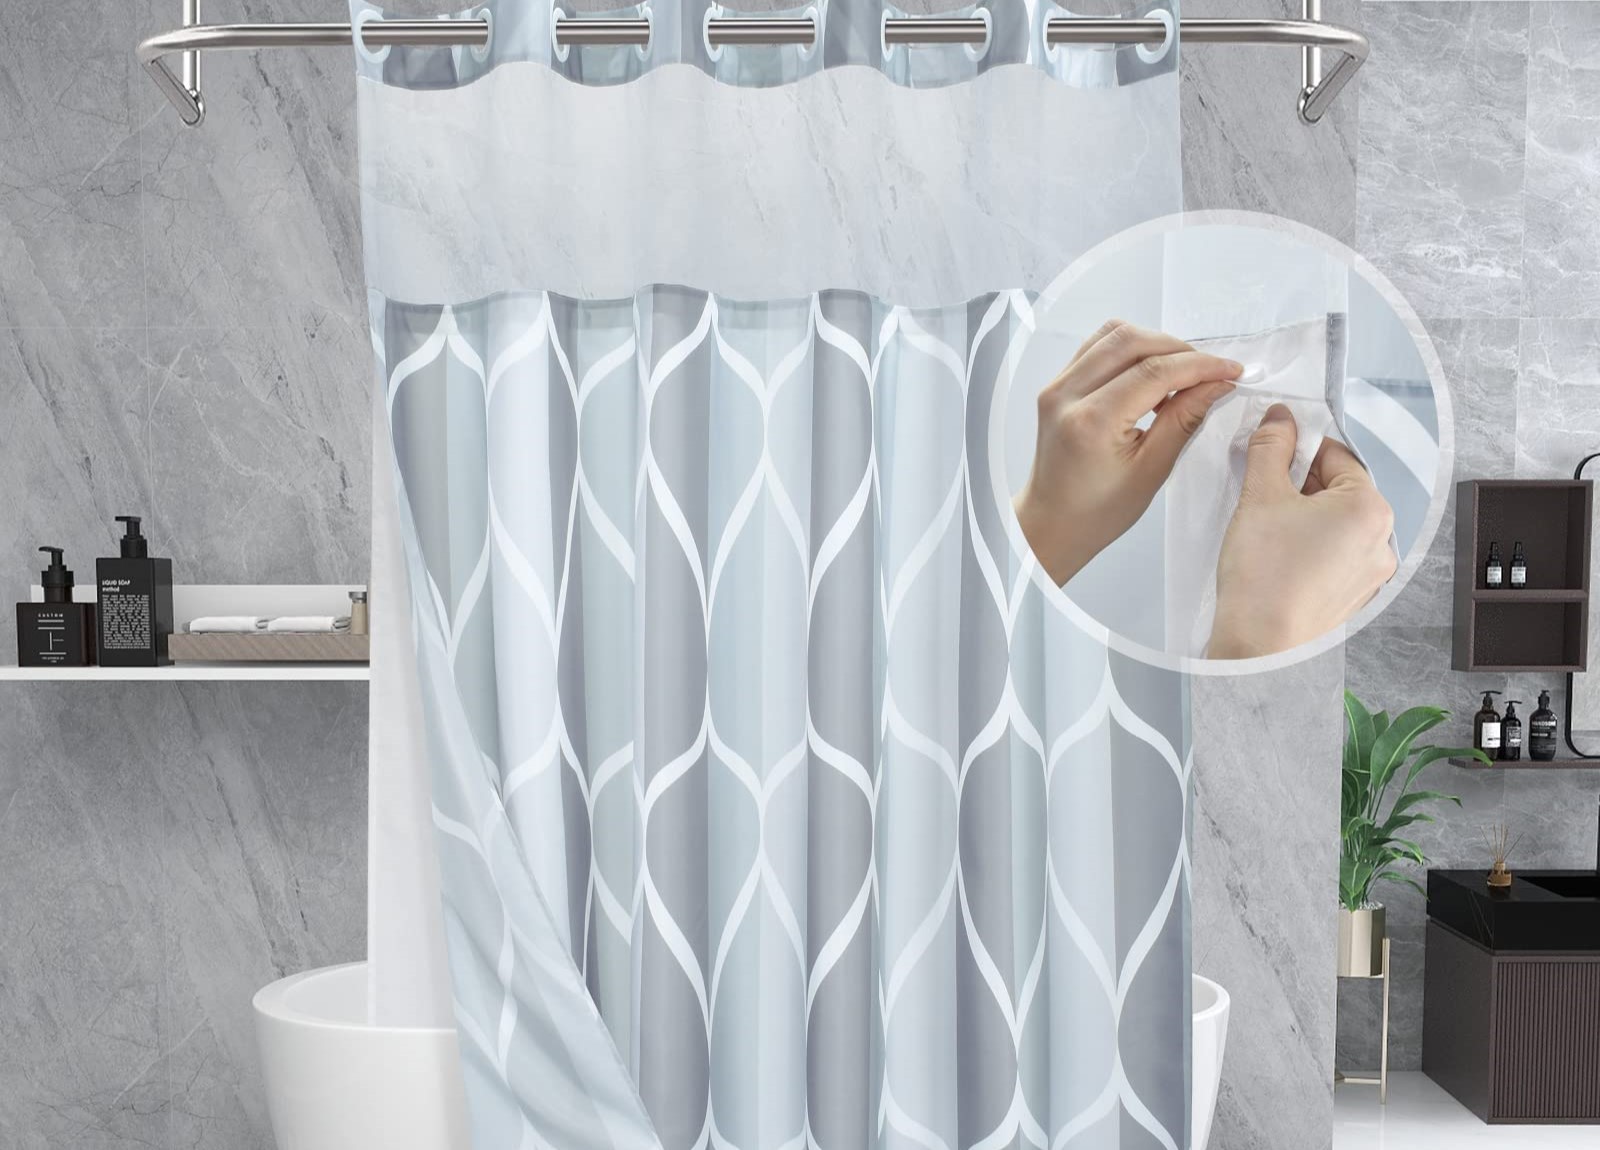 How To Install A Hookless Shower Curtain